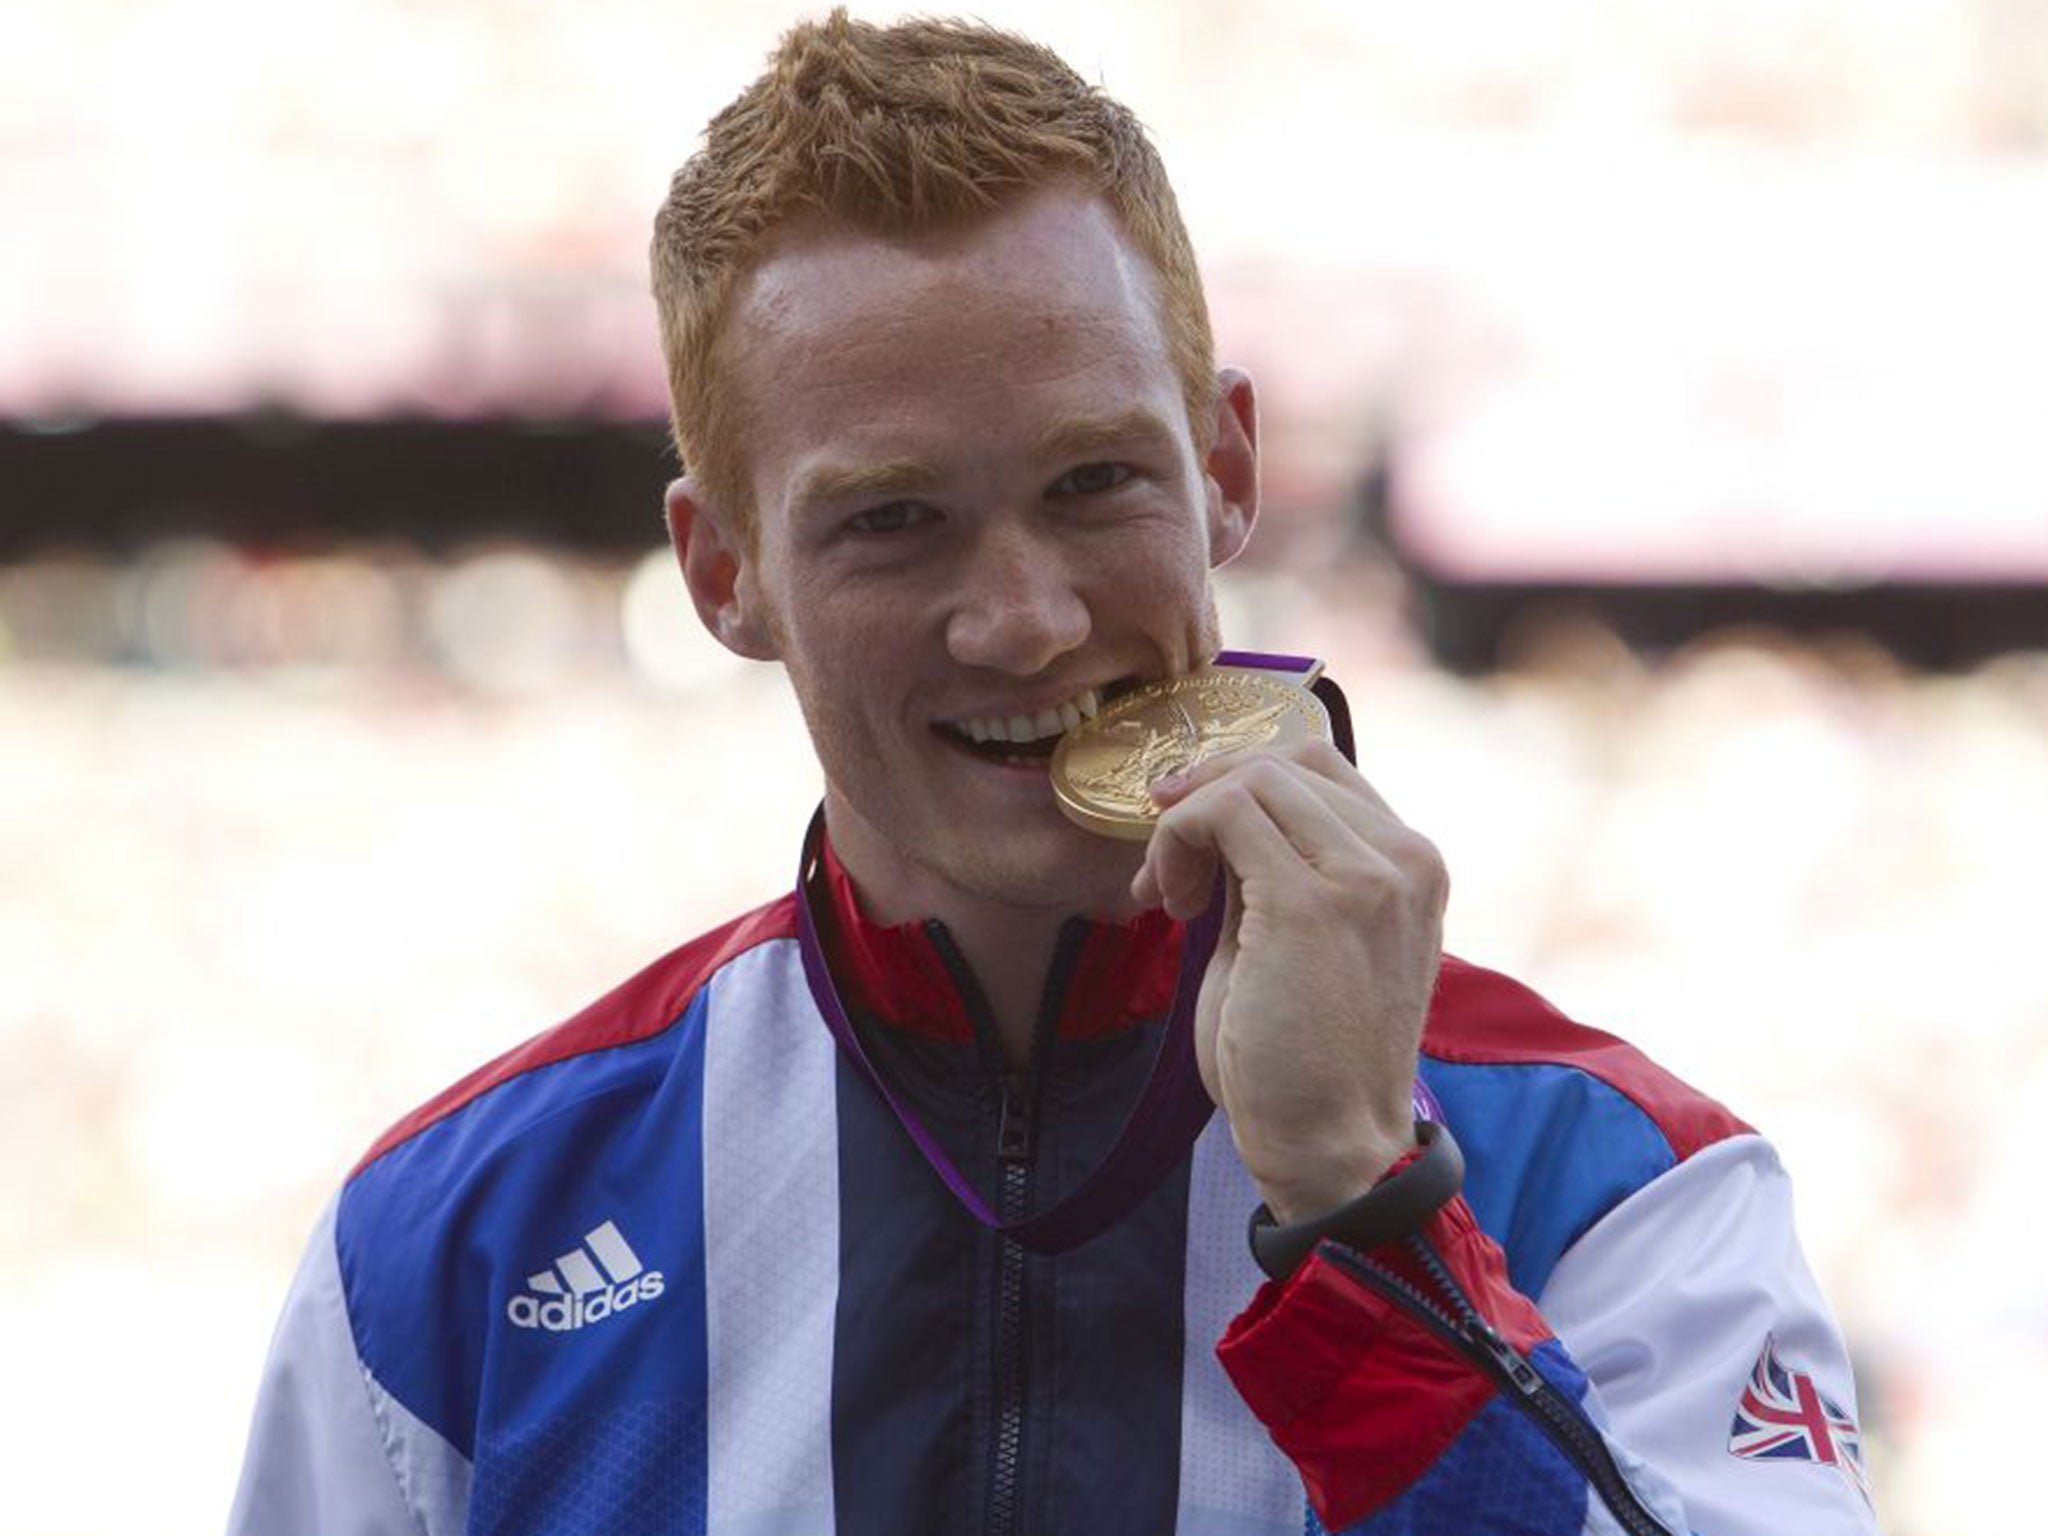 Greg Rutherford aims to add Commonwealth to Olympic gold – with a British record in mind too